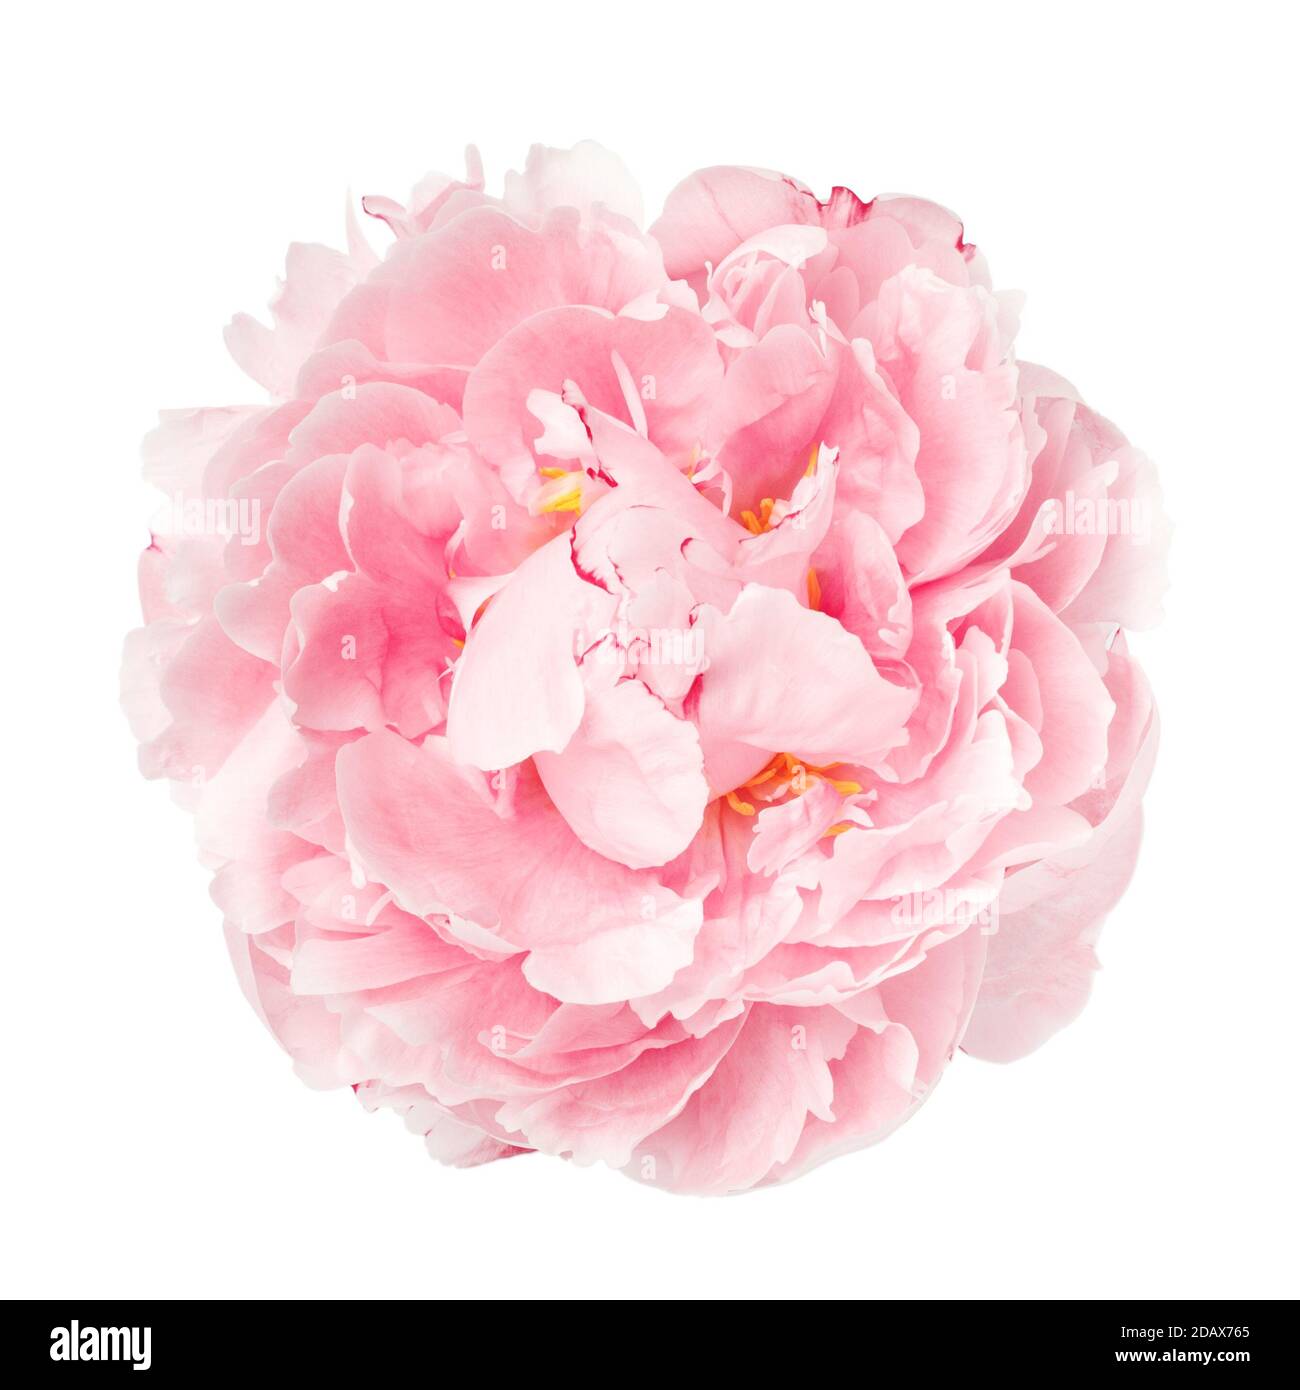 Delicate pink peony bud not opened. Studio shot isolate on a white background flower. Stock Photo